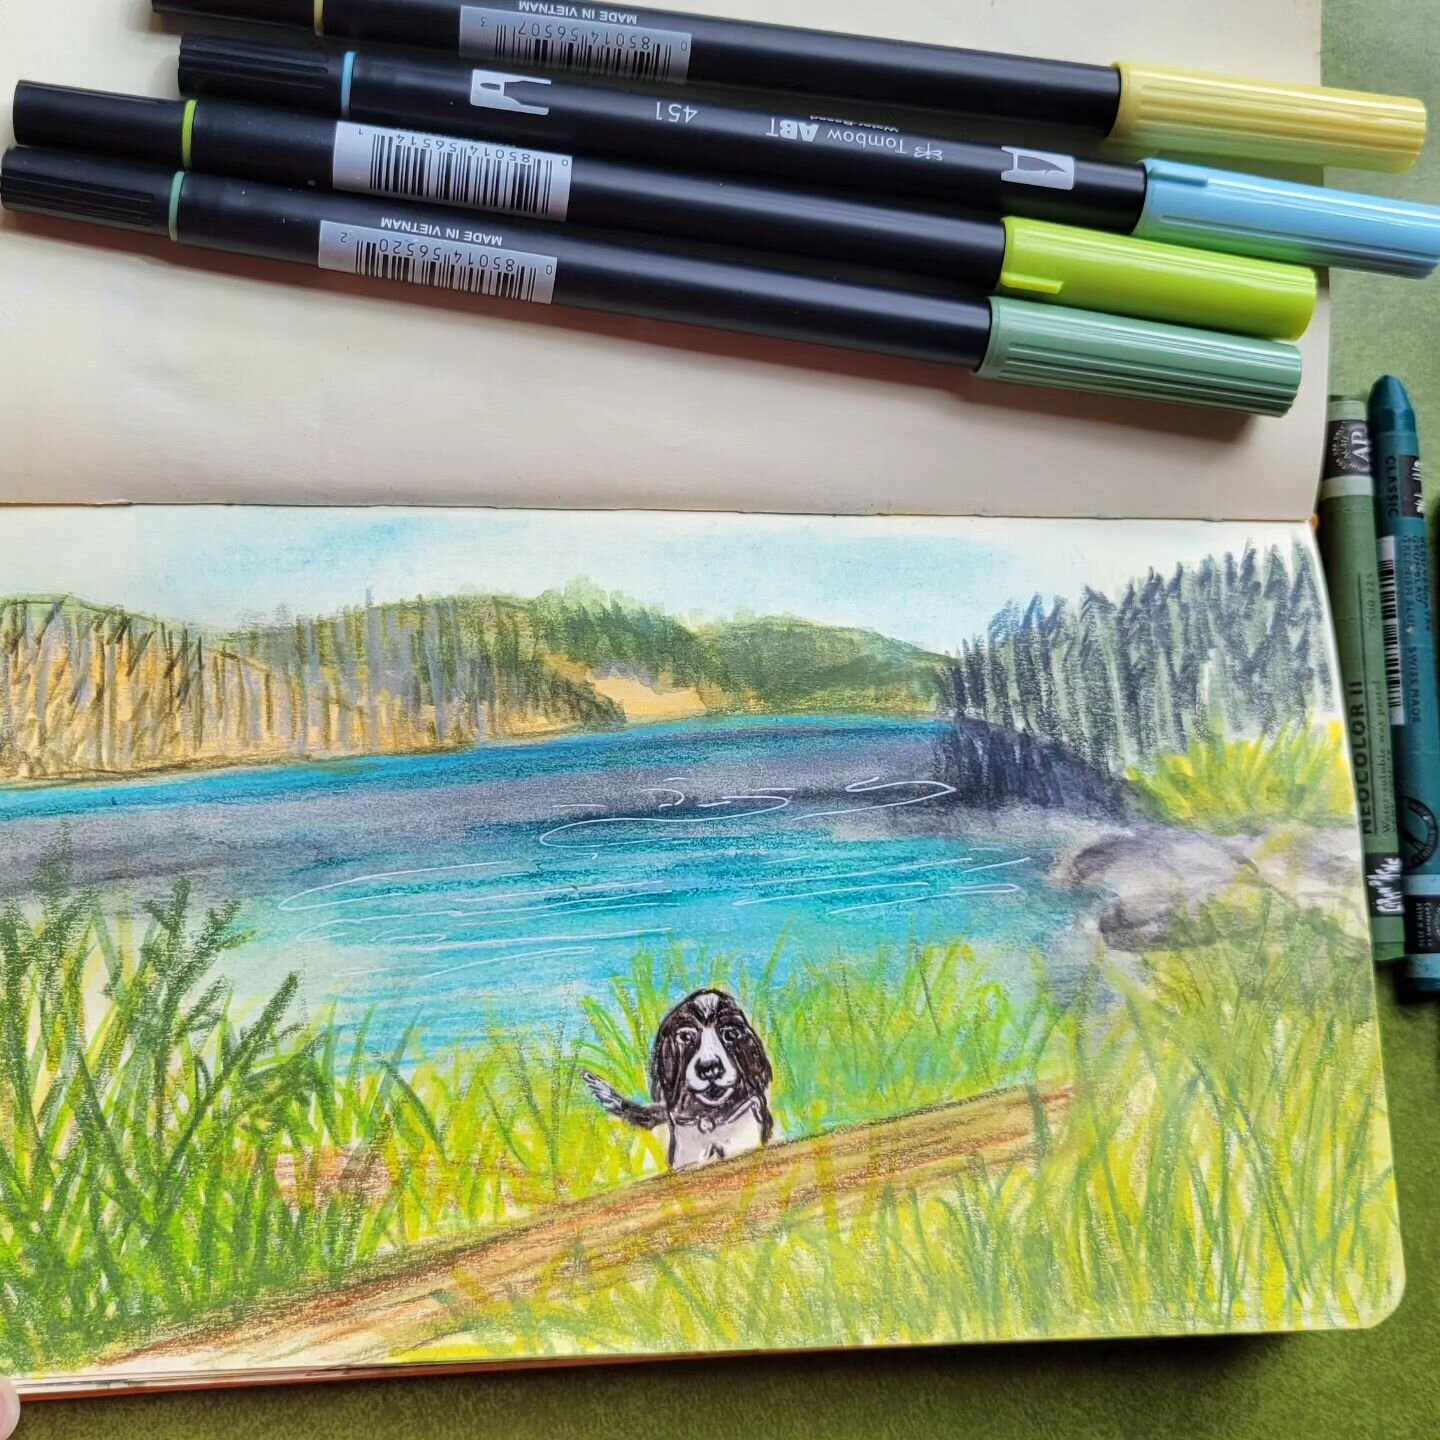 Hidden Pond #3 This is from a photo of a mountain pond/lake in the Beartooth Range we hiked to with our dog, Rev. It is a great memory!

Bring Spring Art Challenge by the one and only @ohn_mar_win hand @jendixonarts @marienoellewurm @julia_henze.

#B